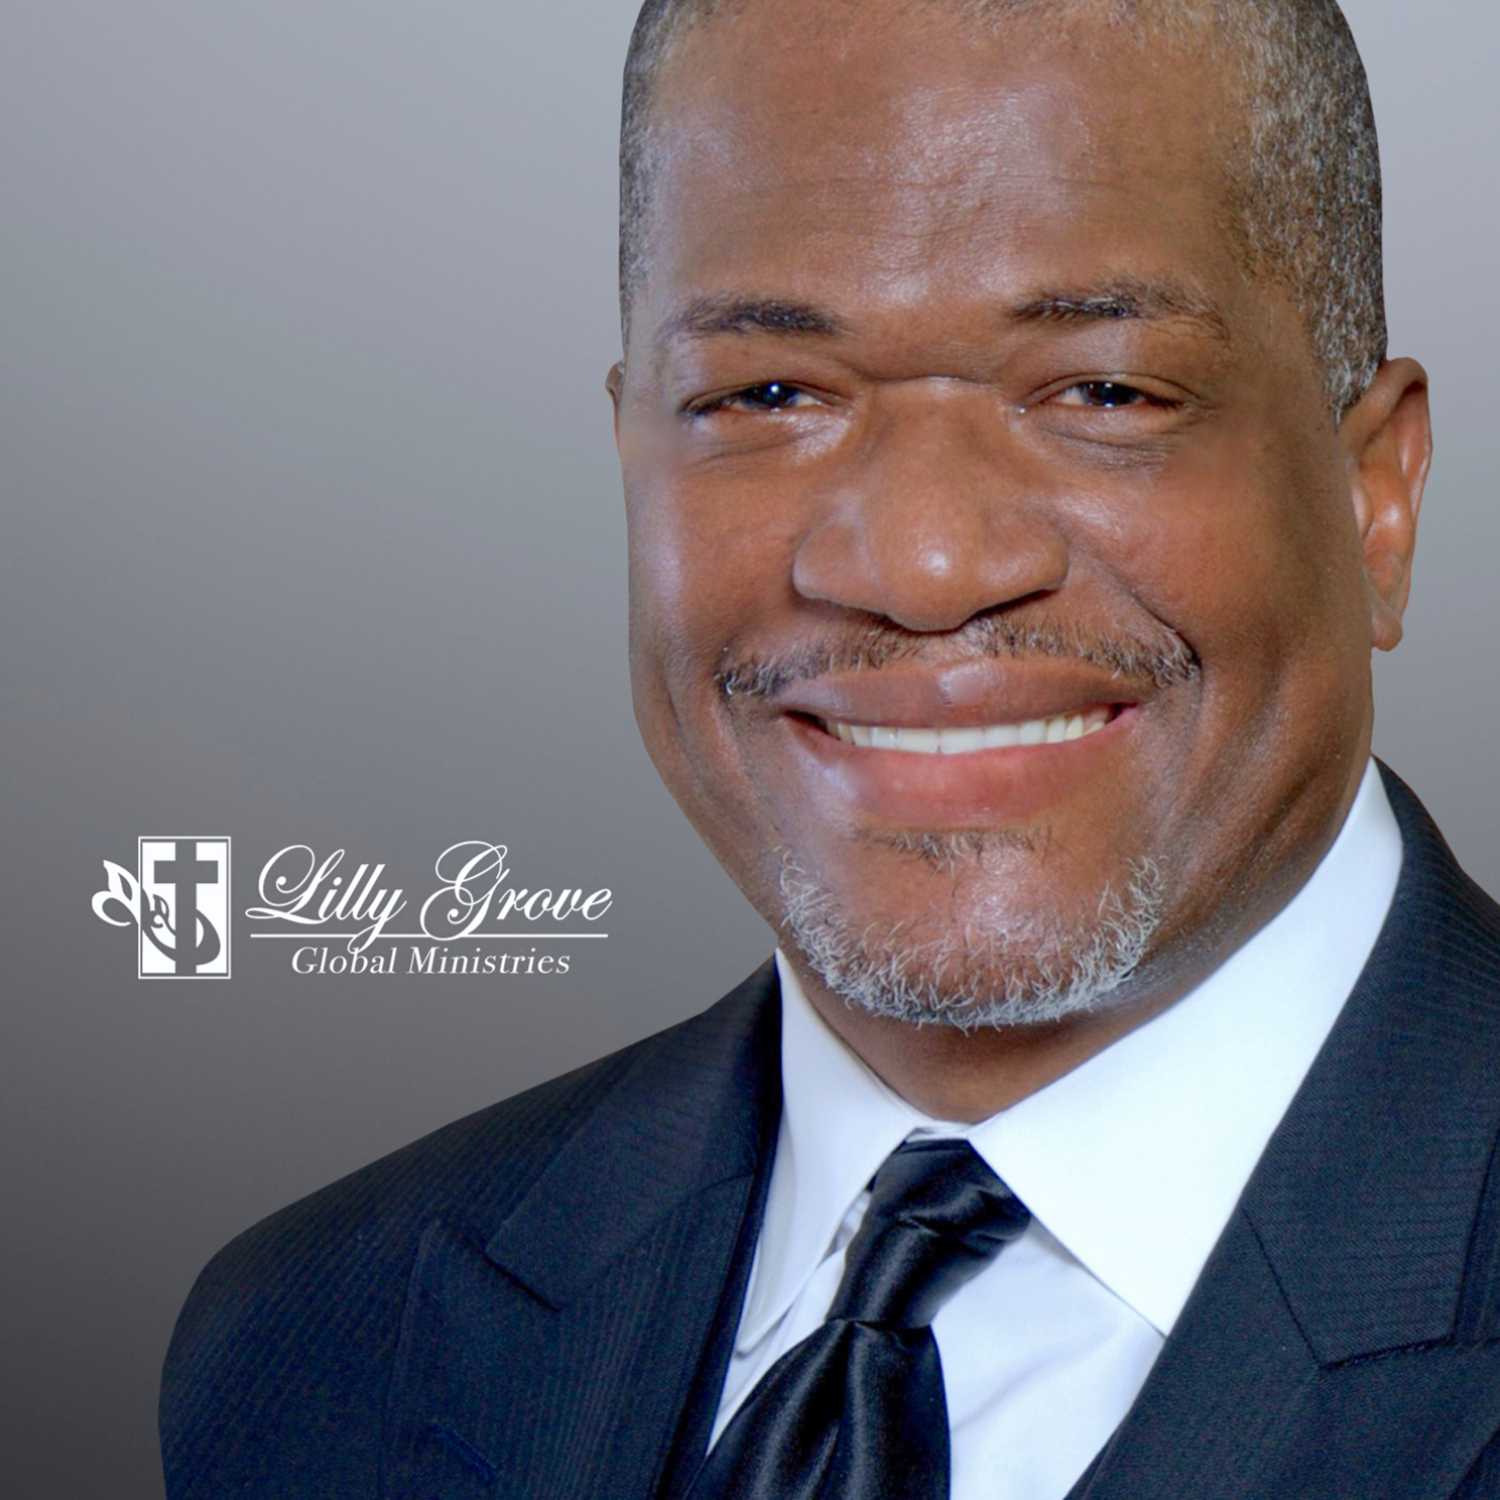 Outliving Your Life - Pt.6 | Rev. Terry K. Anderson